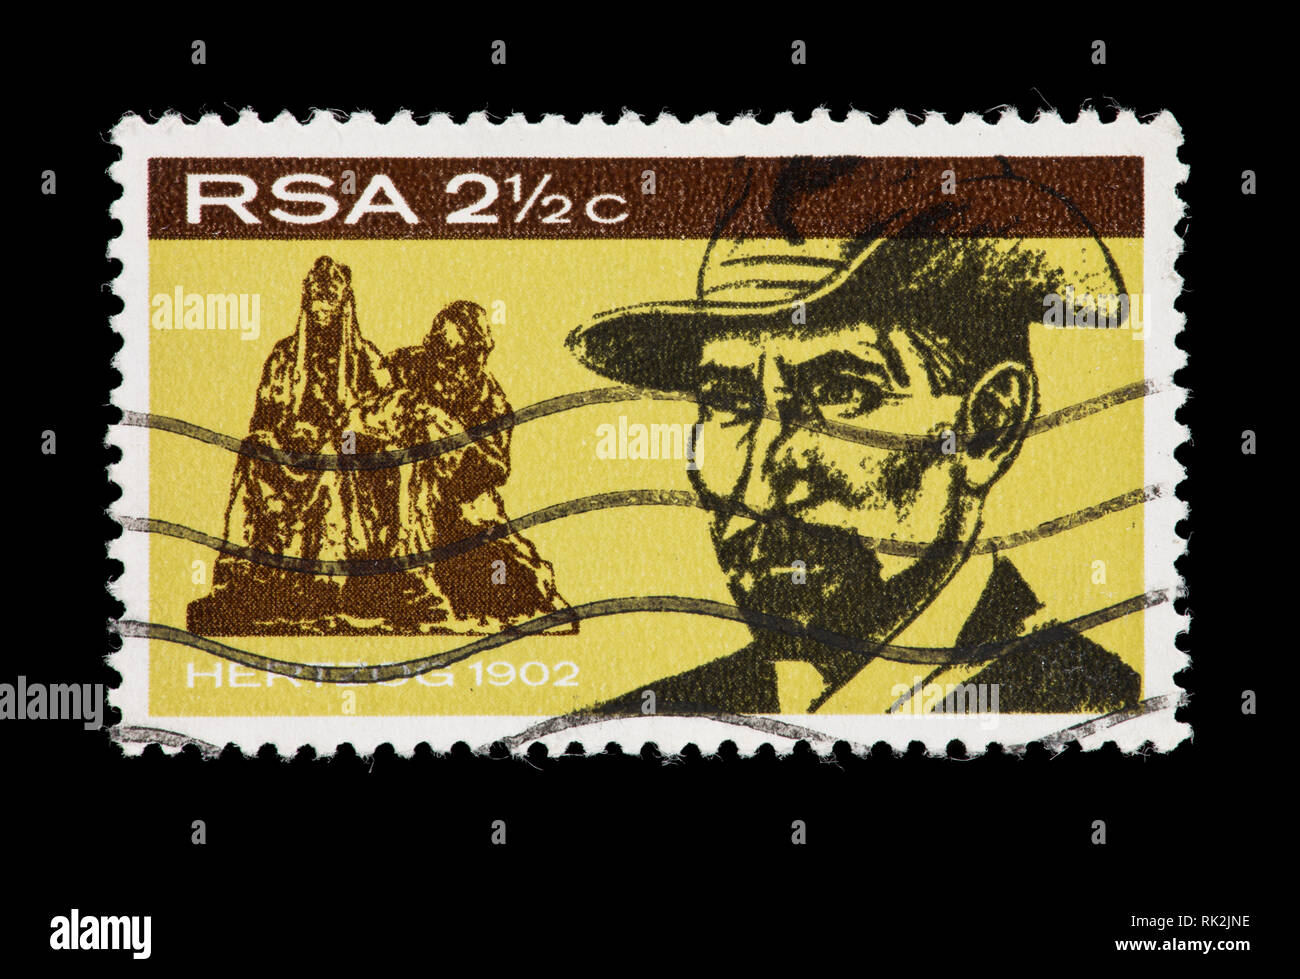 Postage stamp from South Africa depicting James B. M. Hertzog, Boer general and prime minister. Stock Photo